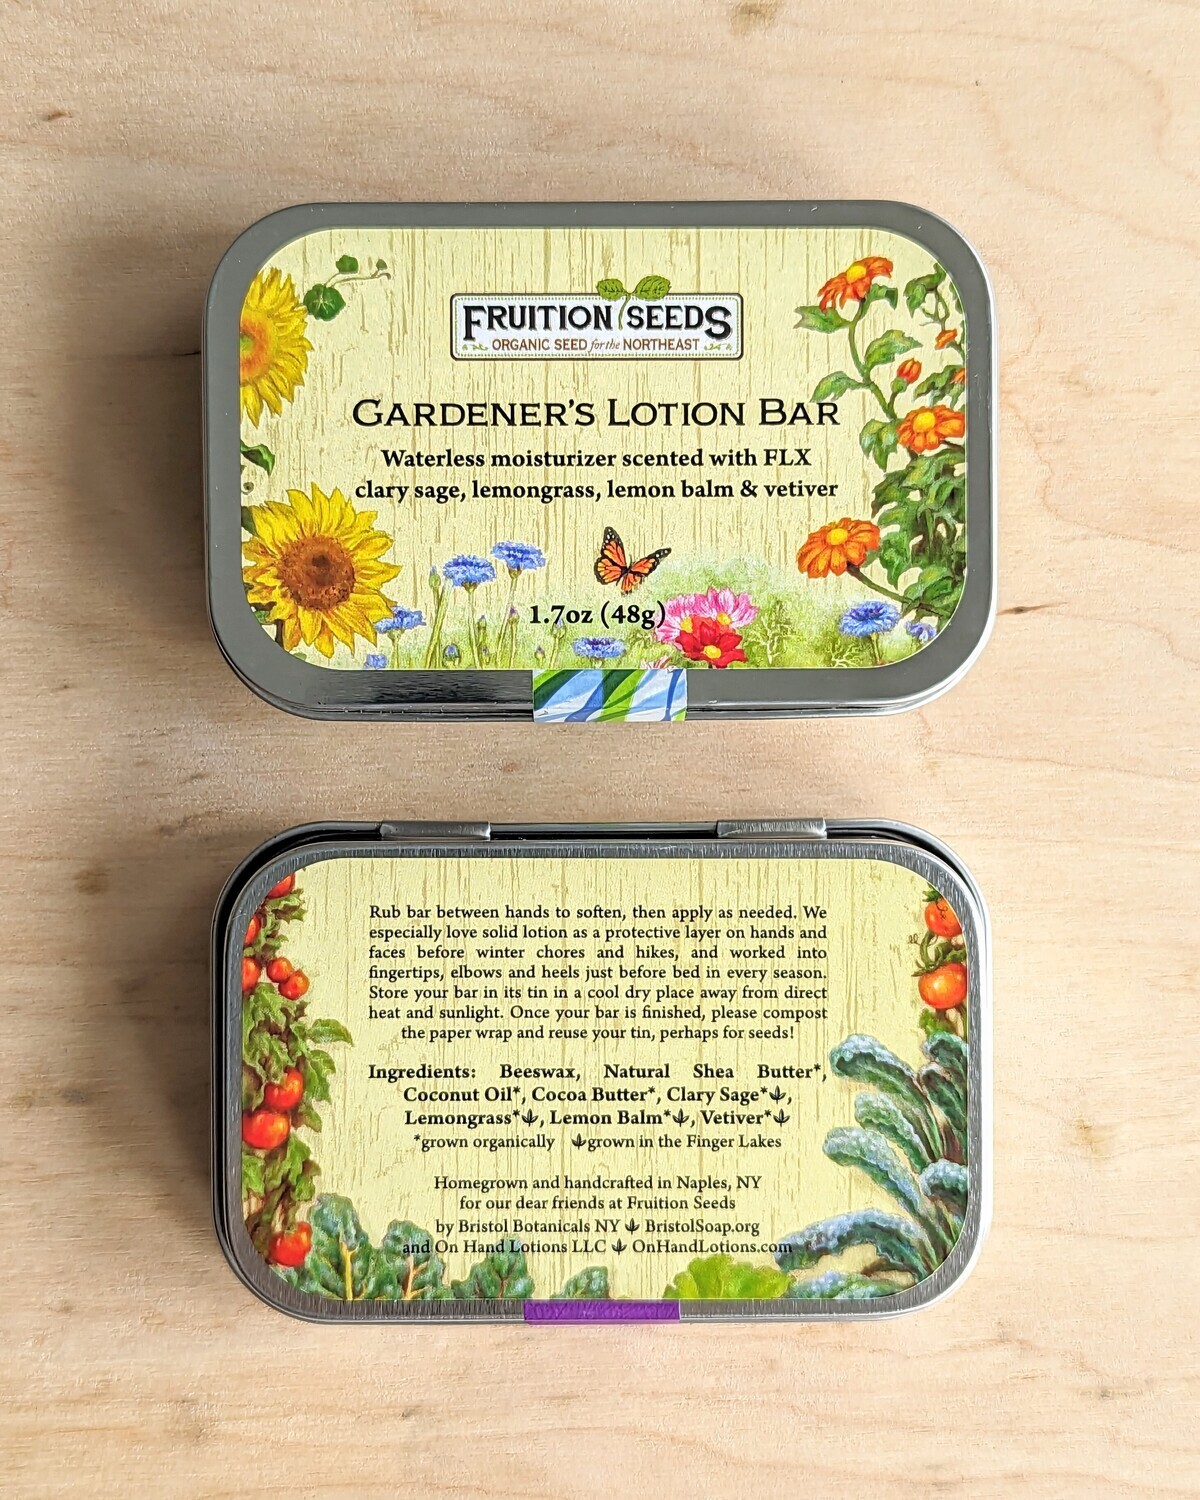 Gardener's Lotion Bar with Fruition Seeds!